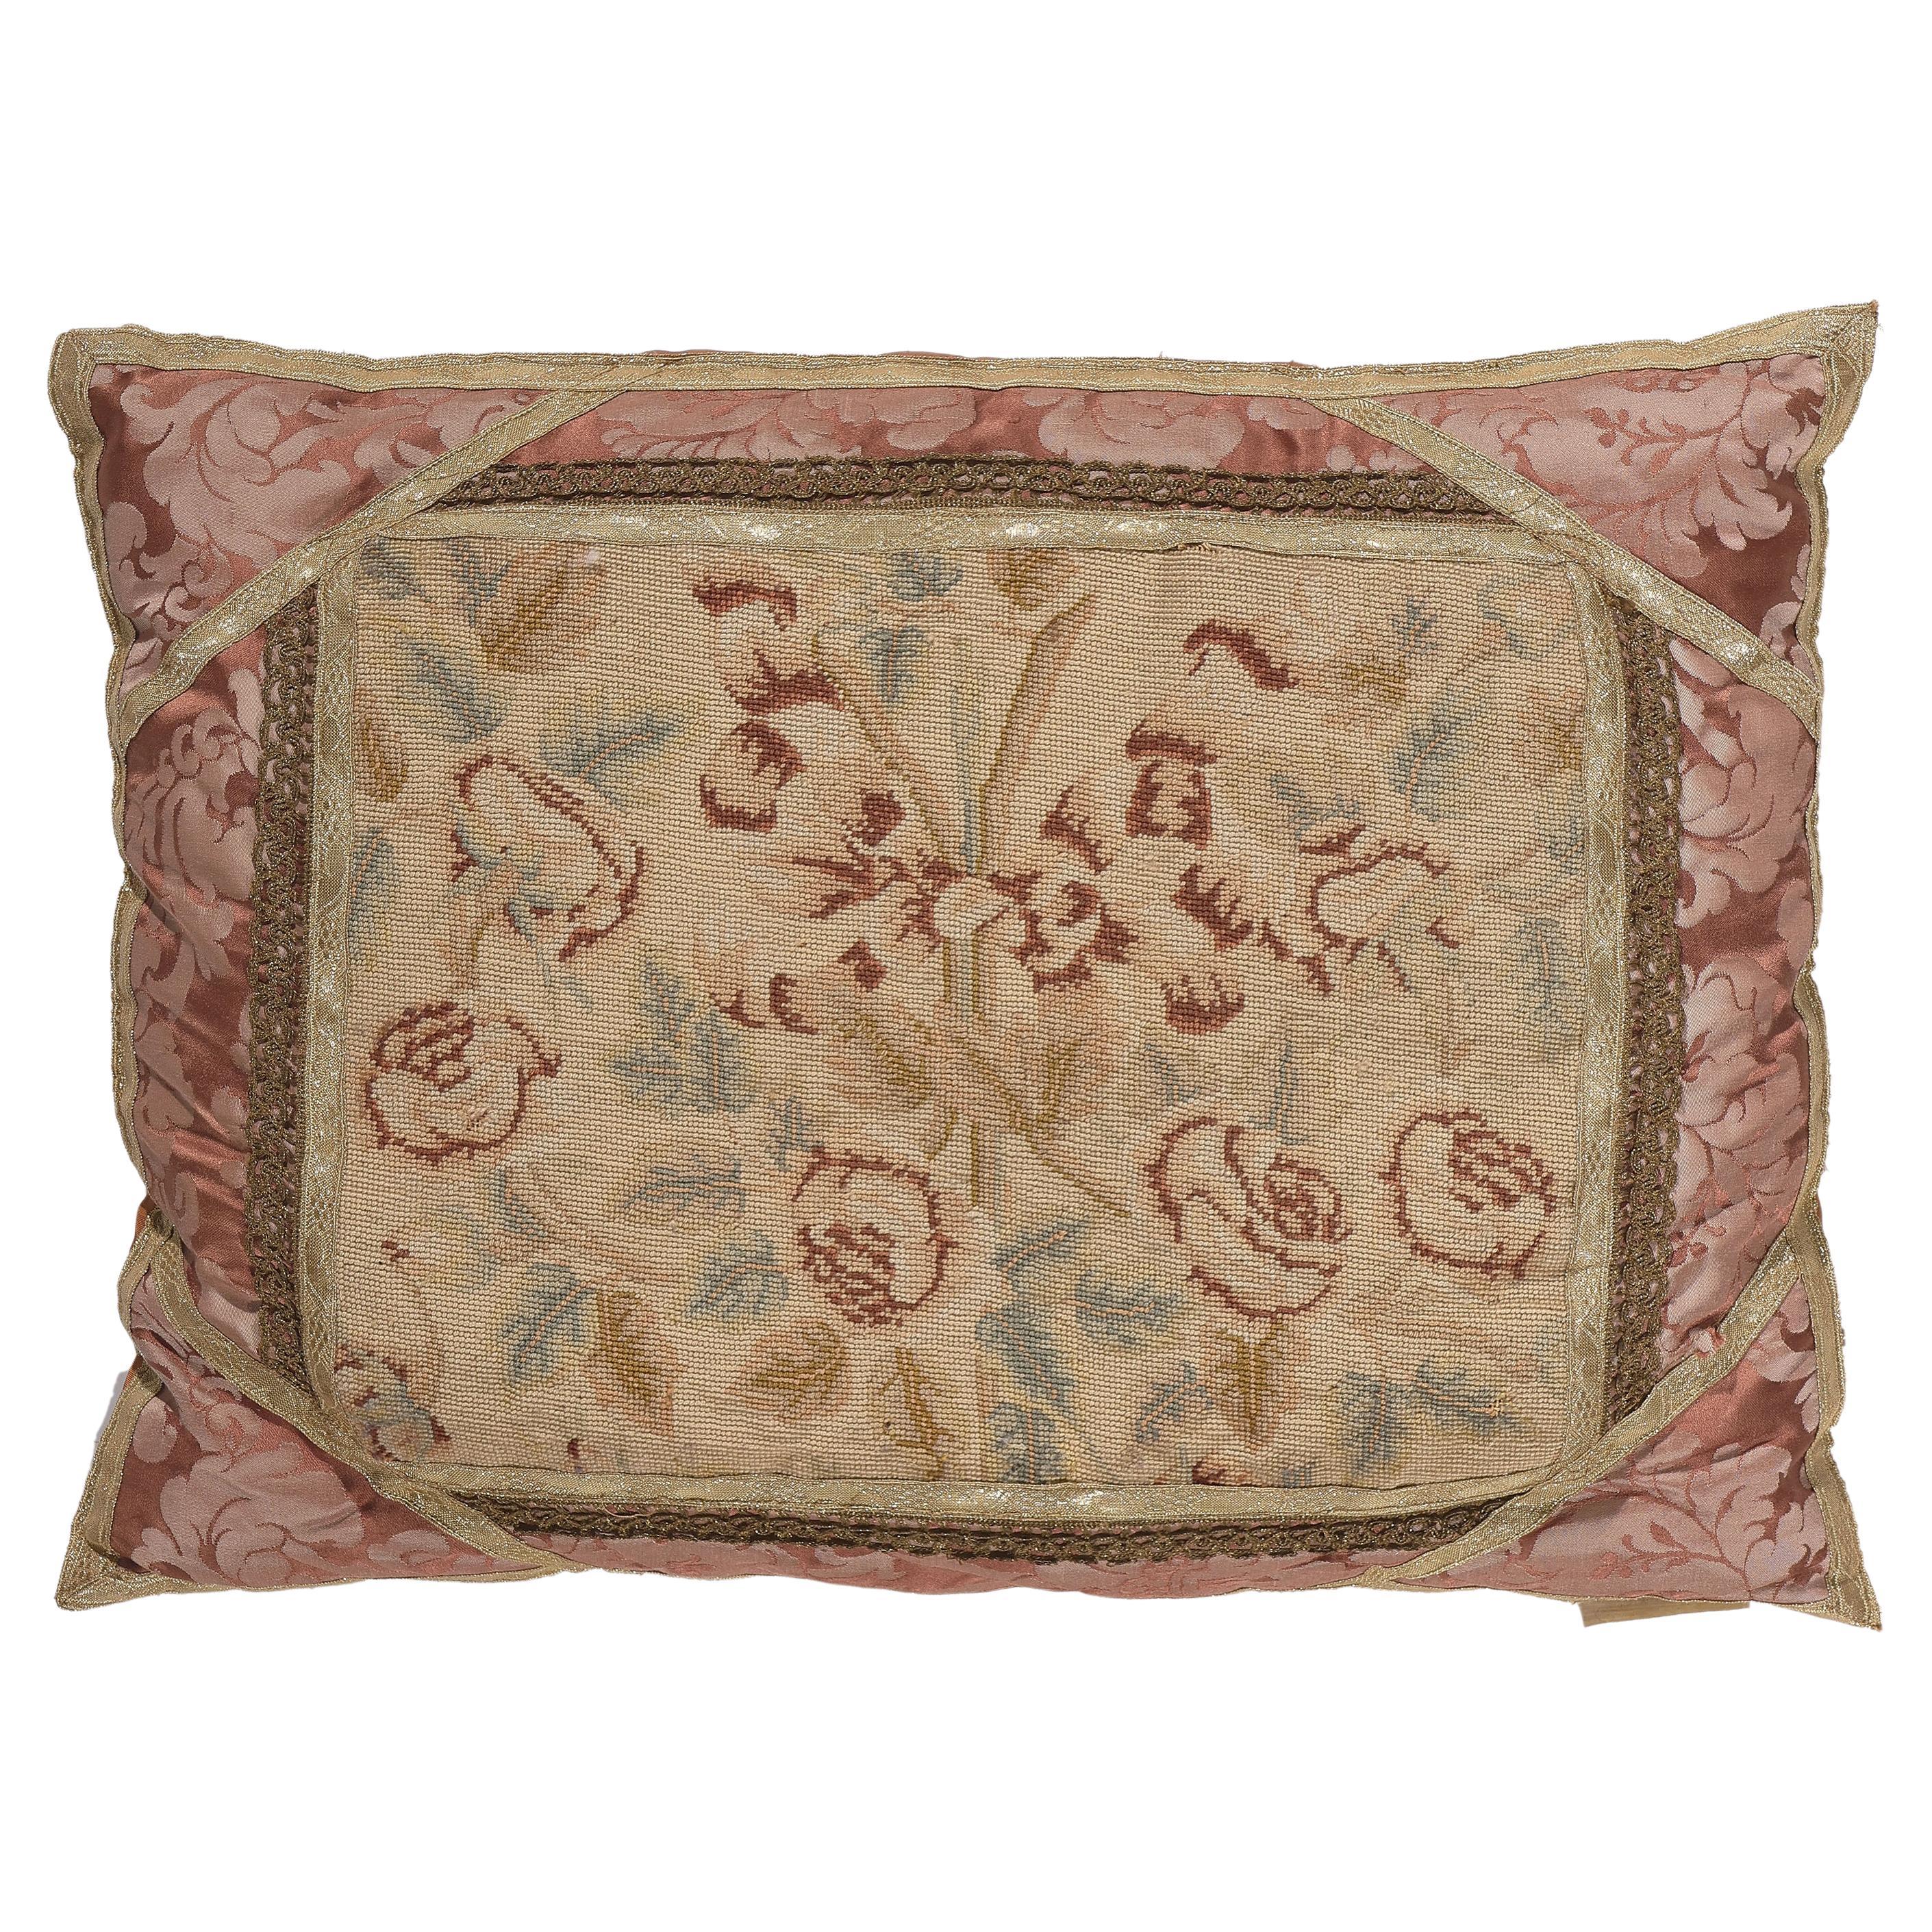 Antique French Aubusson Pillow with Needlepoint Tapestry For Sale